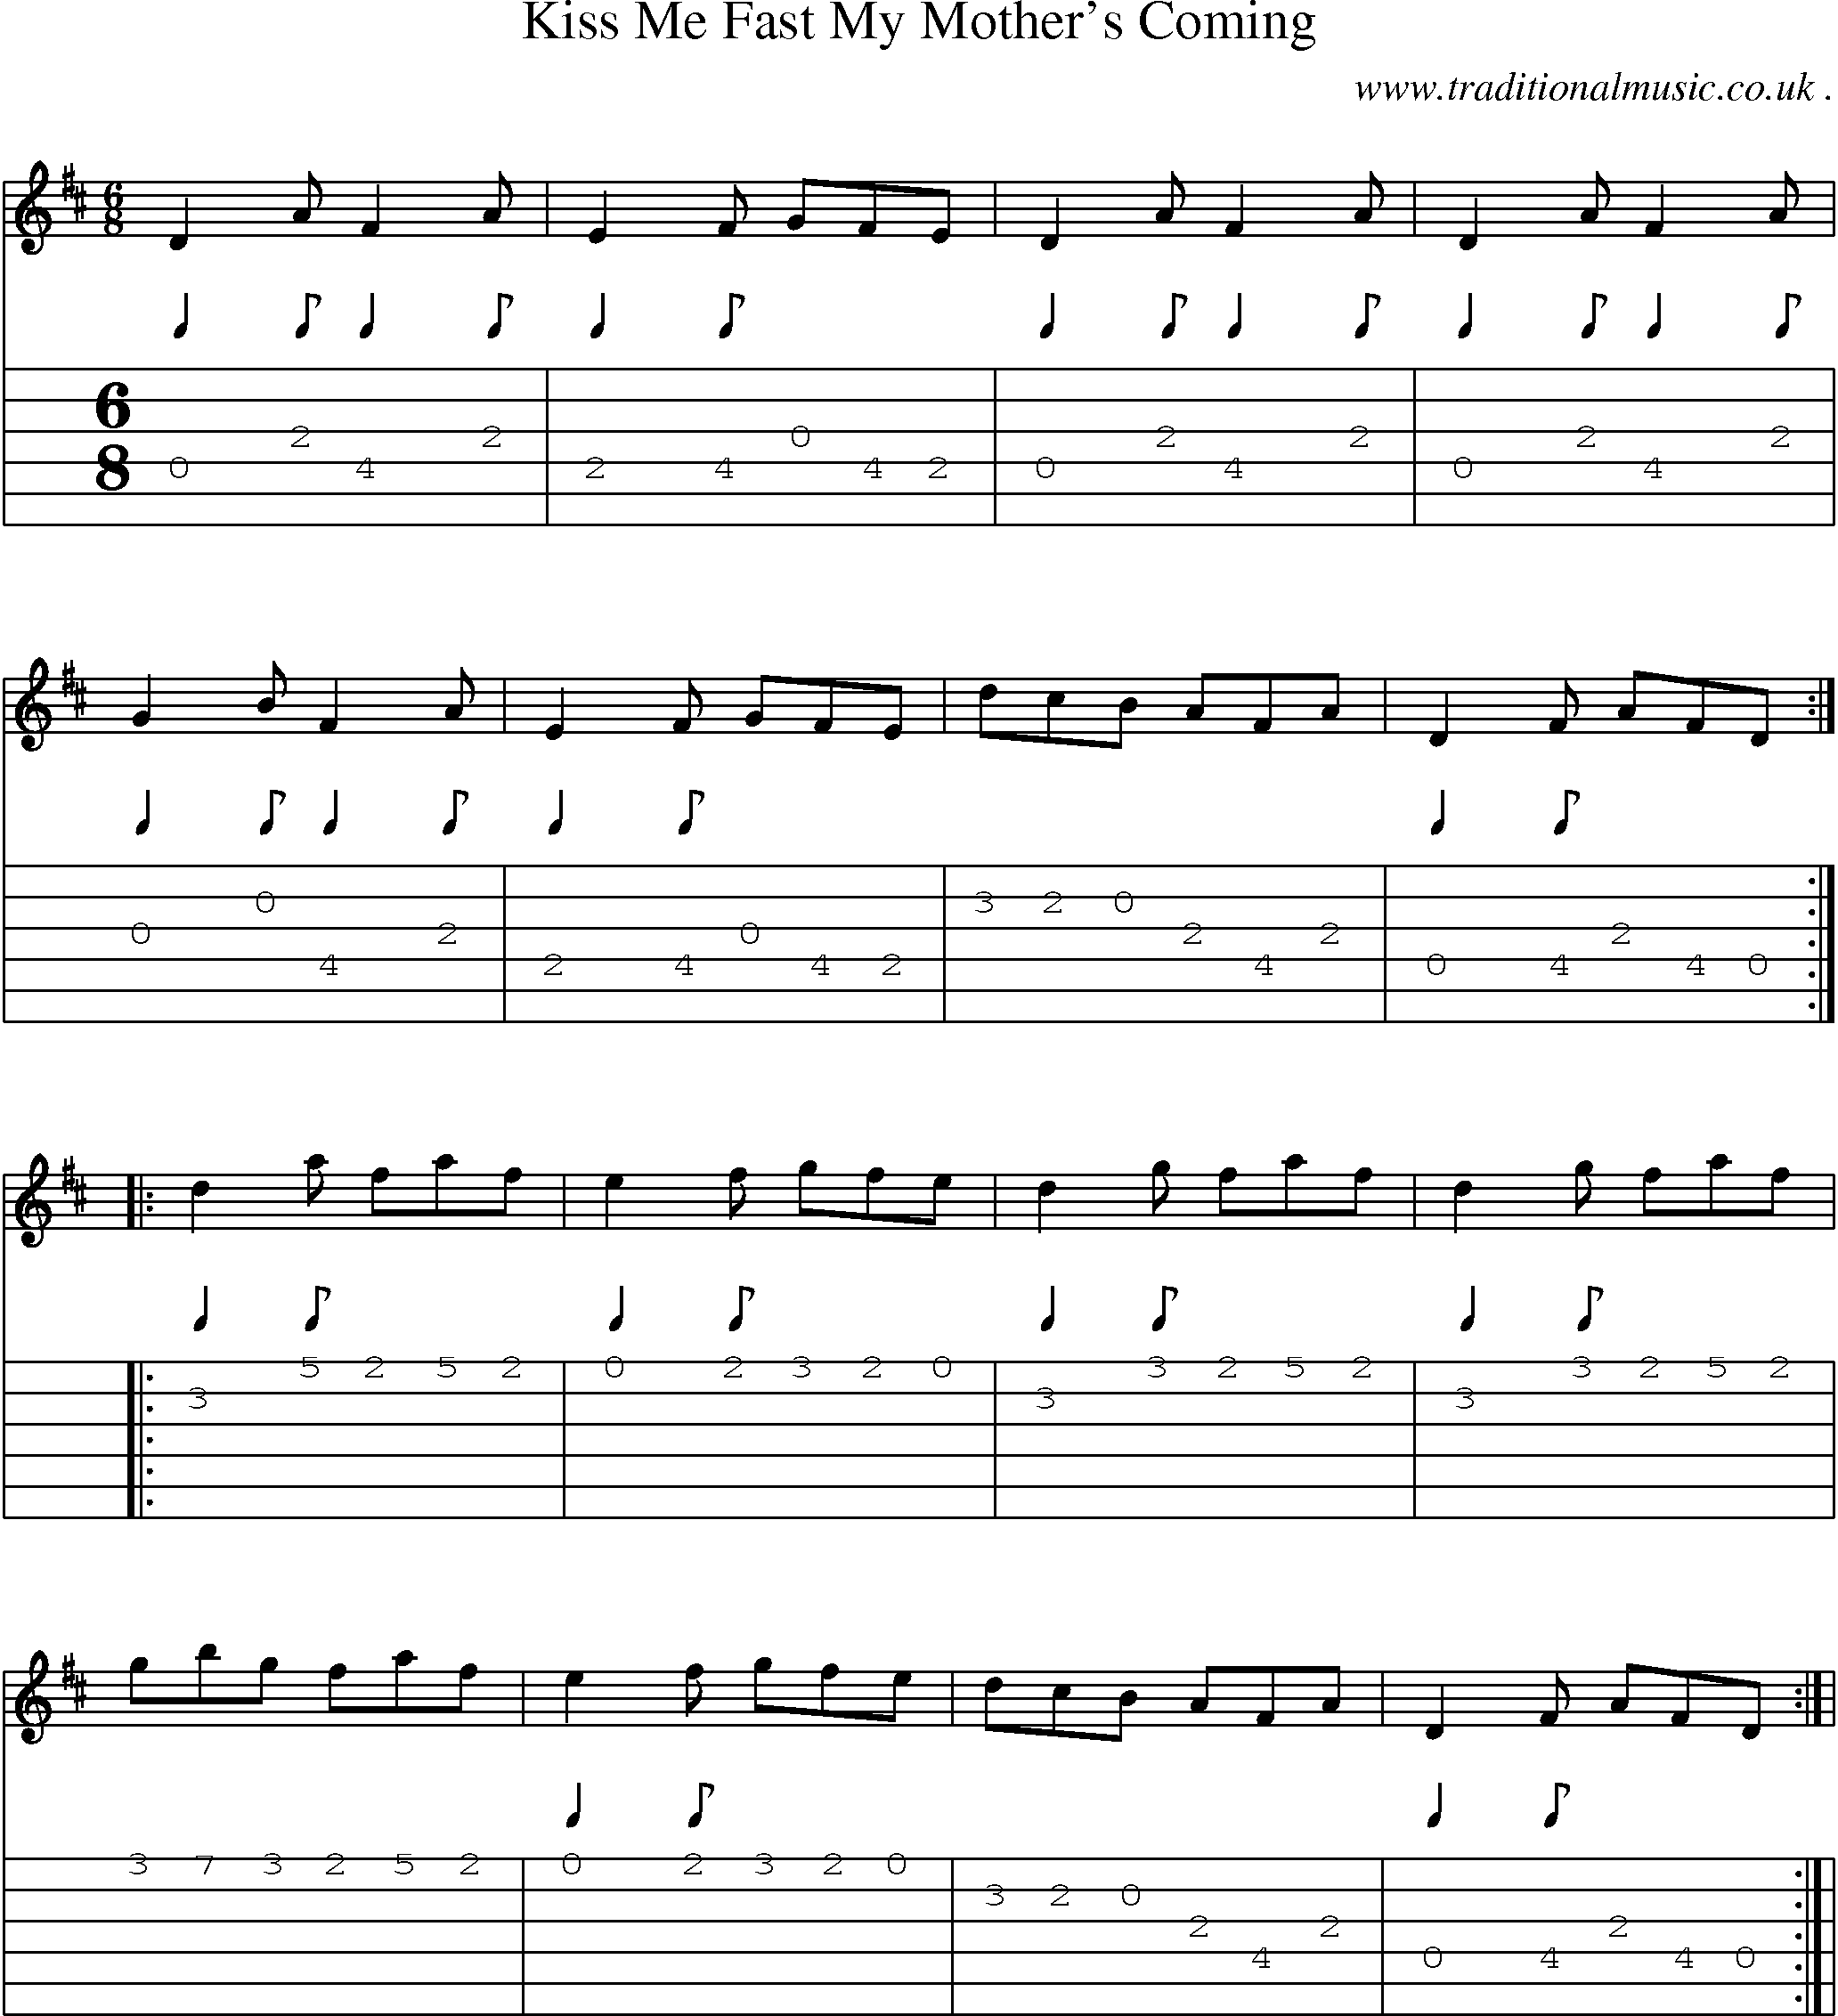 Sheet-Music and Guitar Tabs for Kiss Me Fast My Mothers Coming